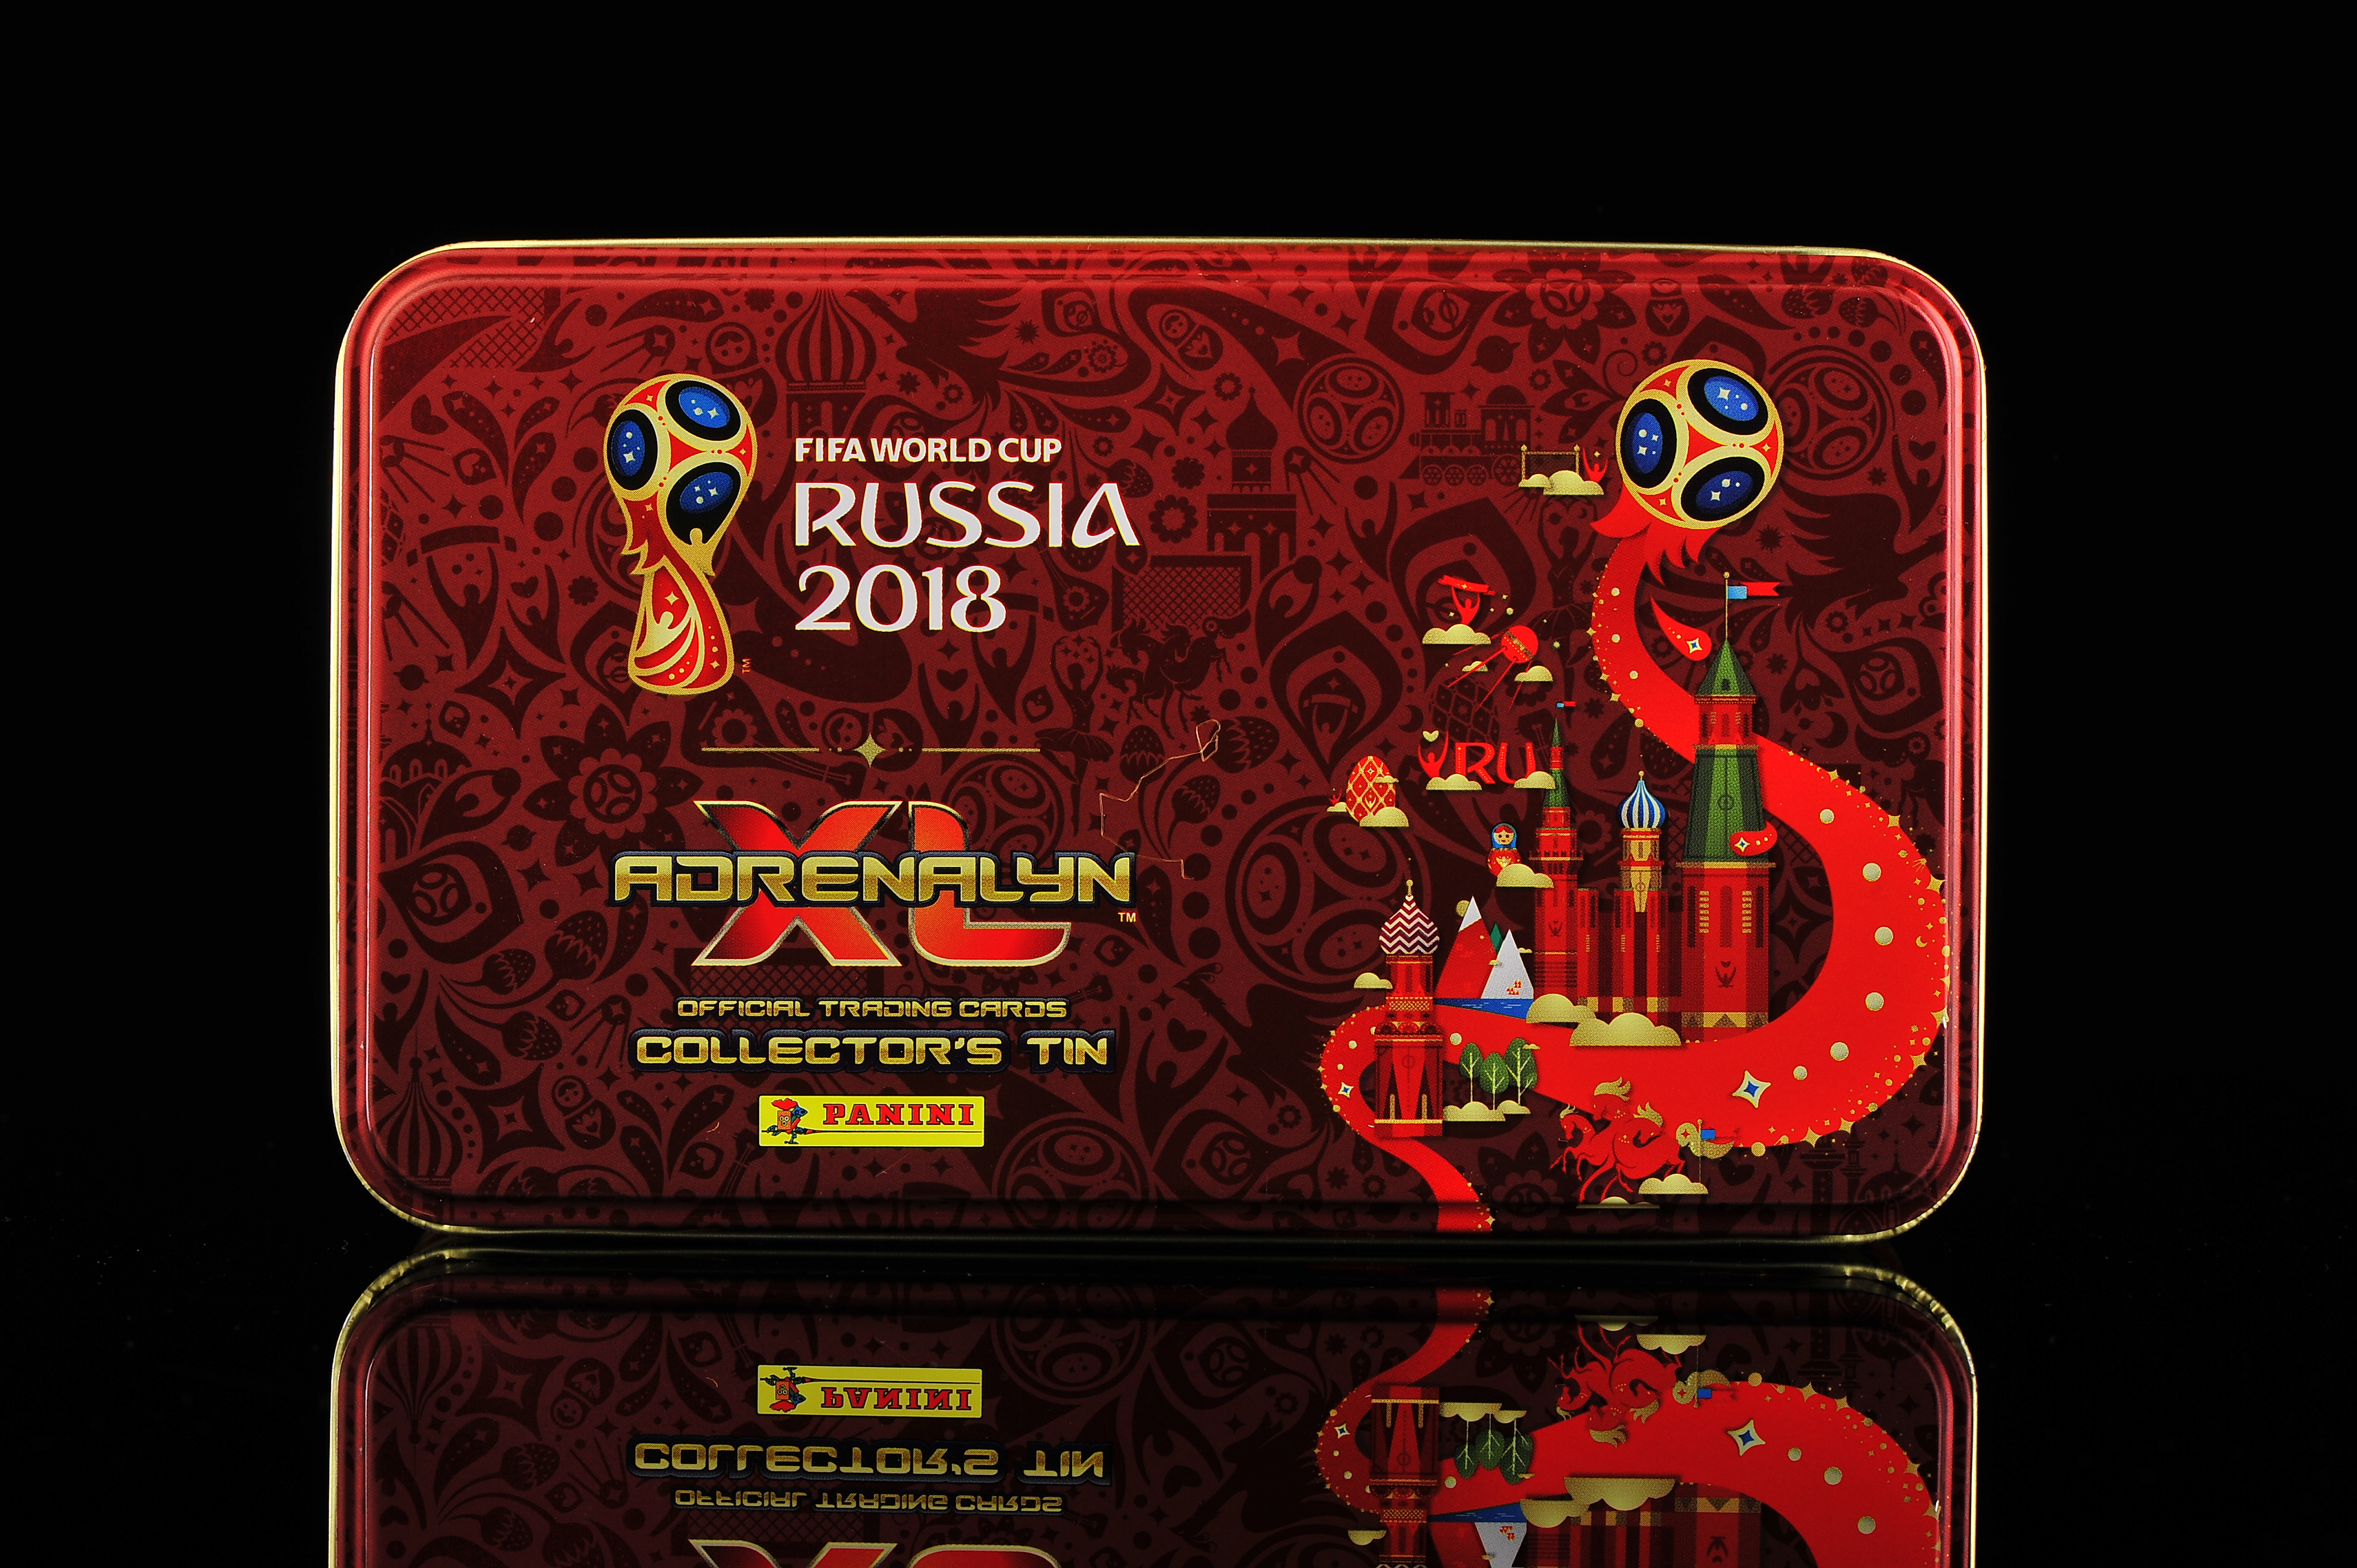 Offical 2018 Russia World Cup Panini collectors tin 